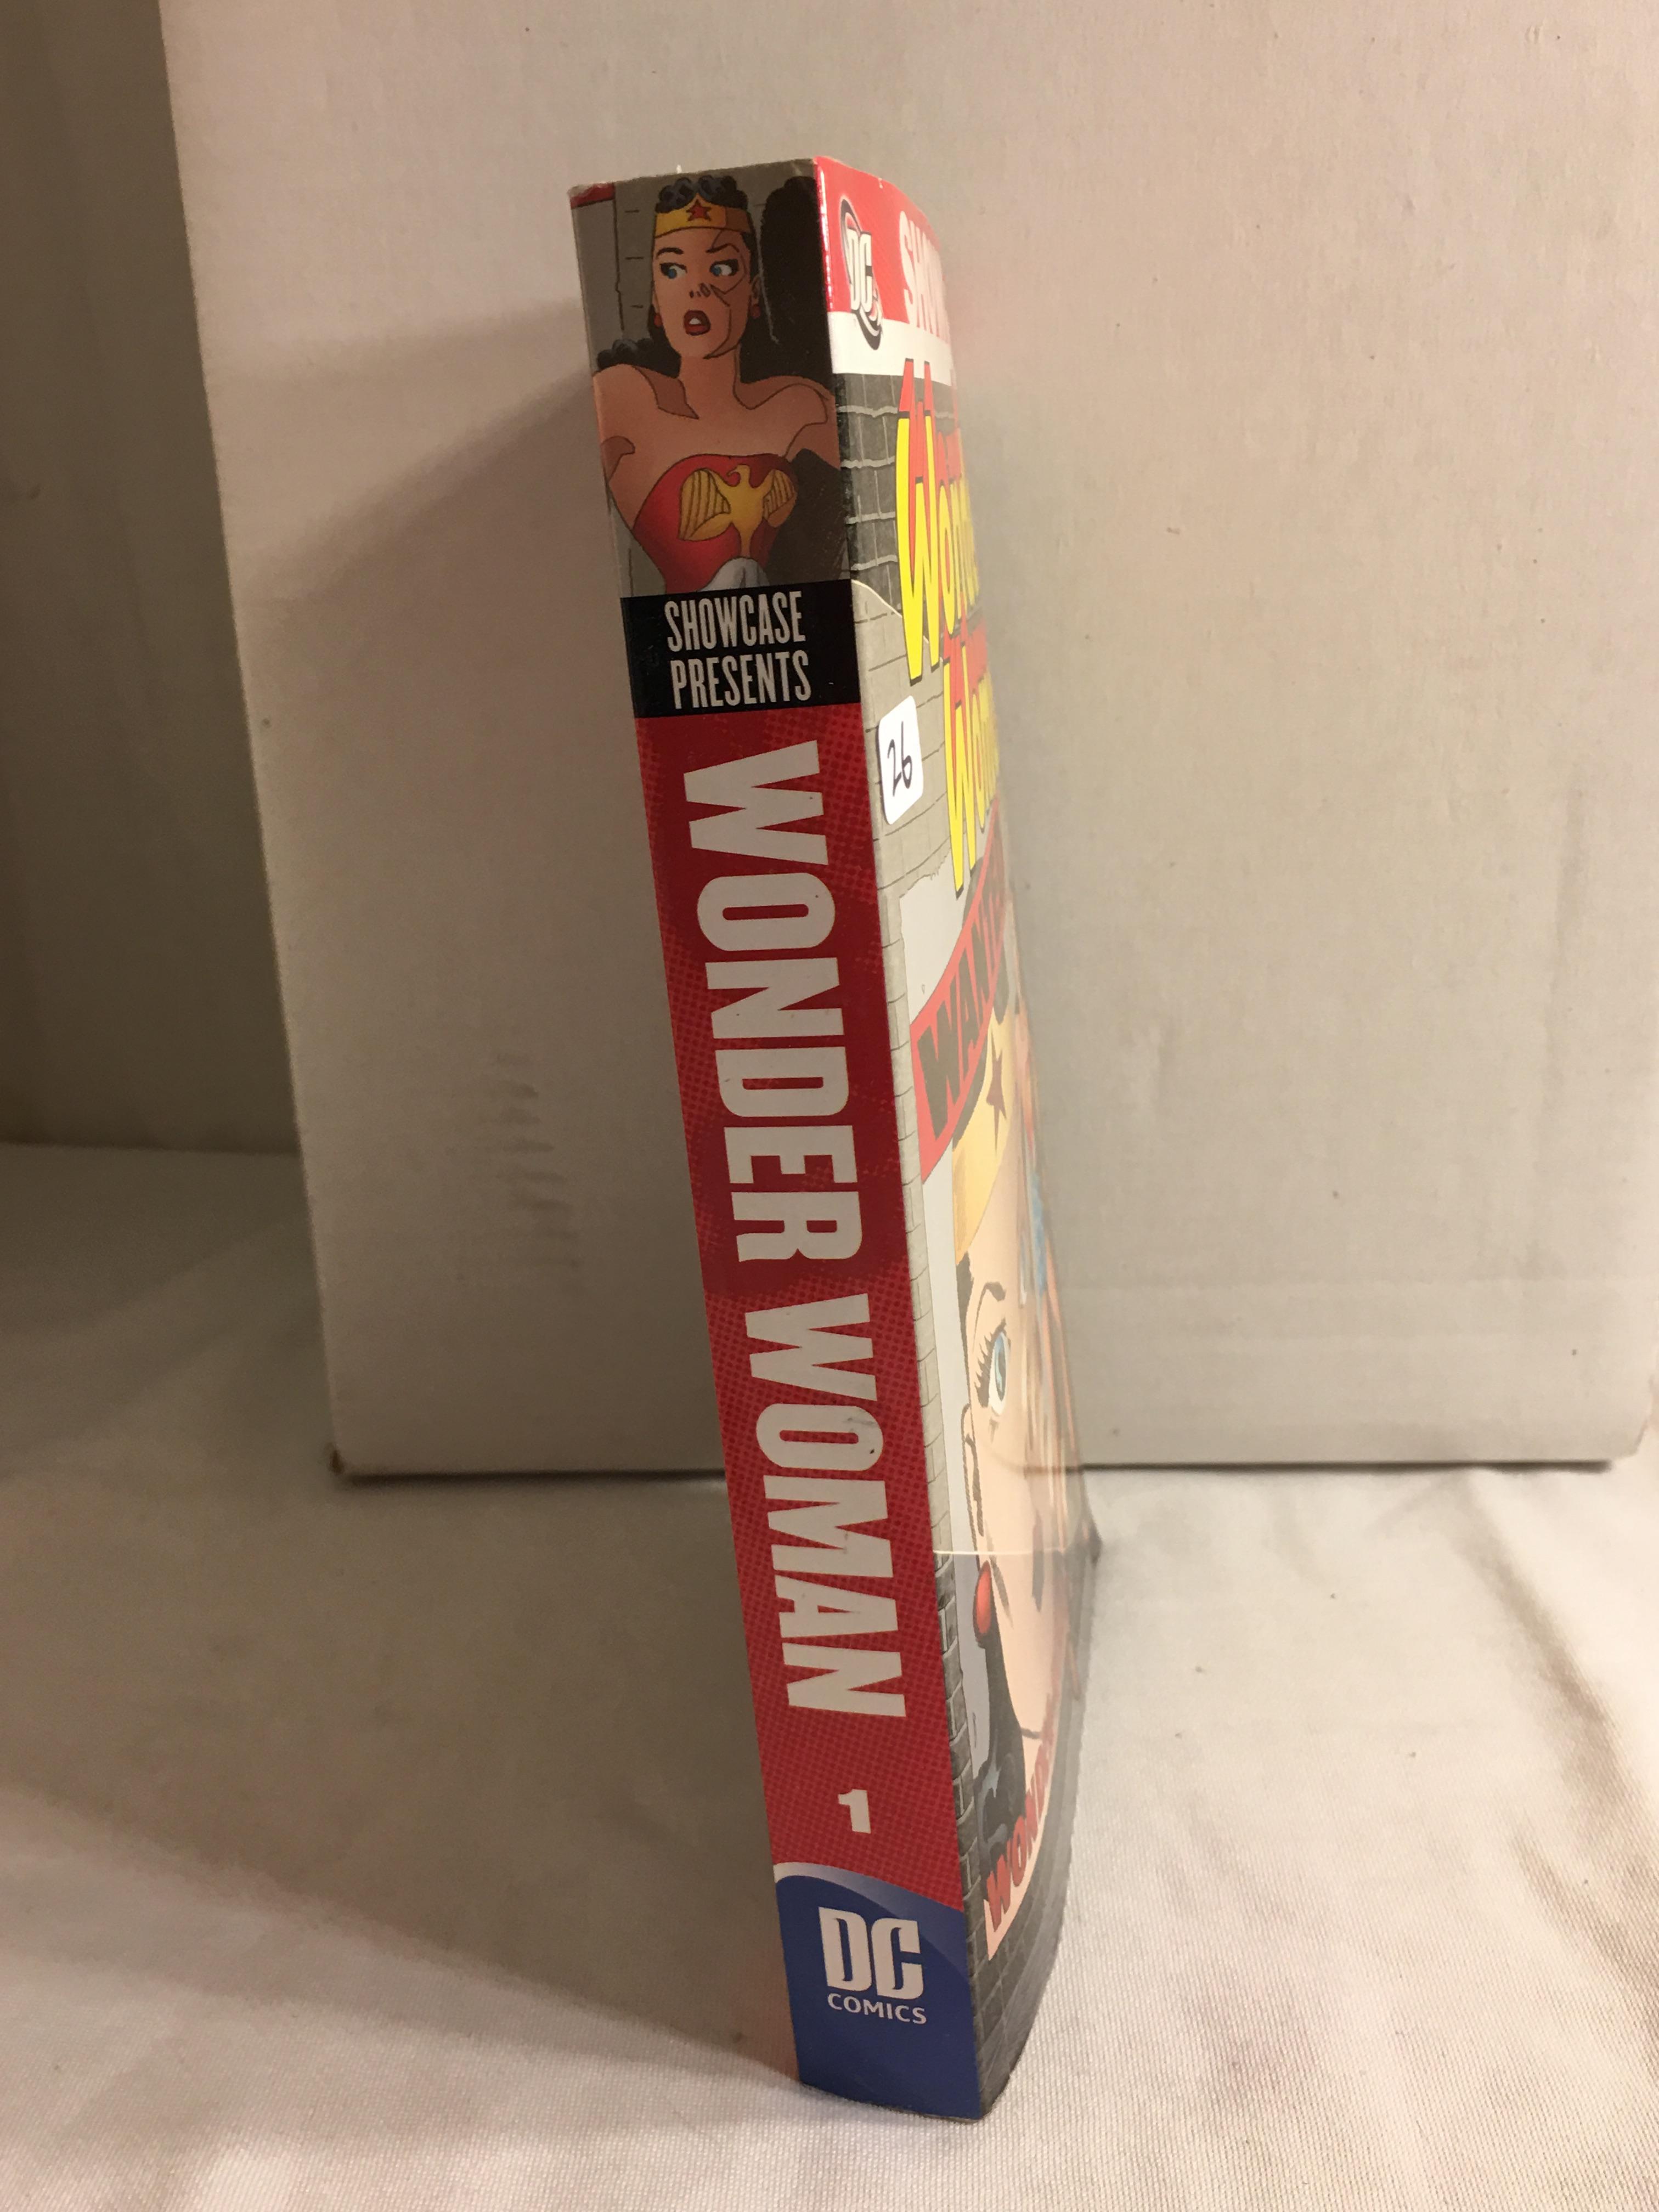 Collector DC, Comics Showcase Presents Wonder Woman Wanted Thick Book